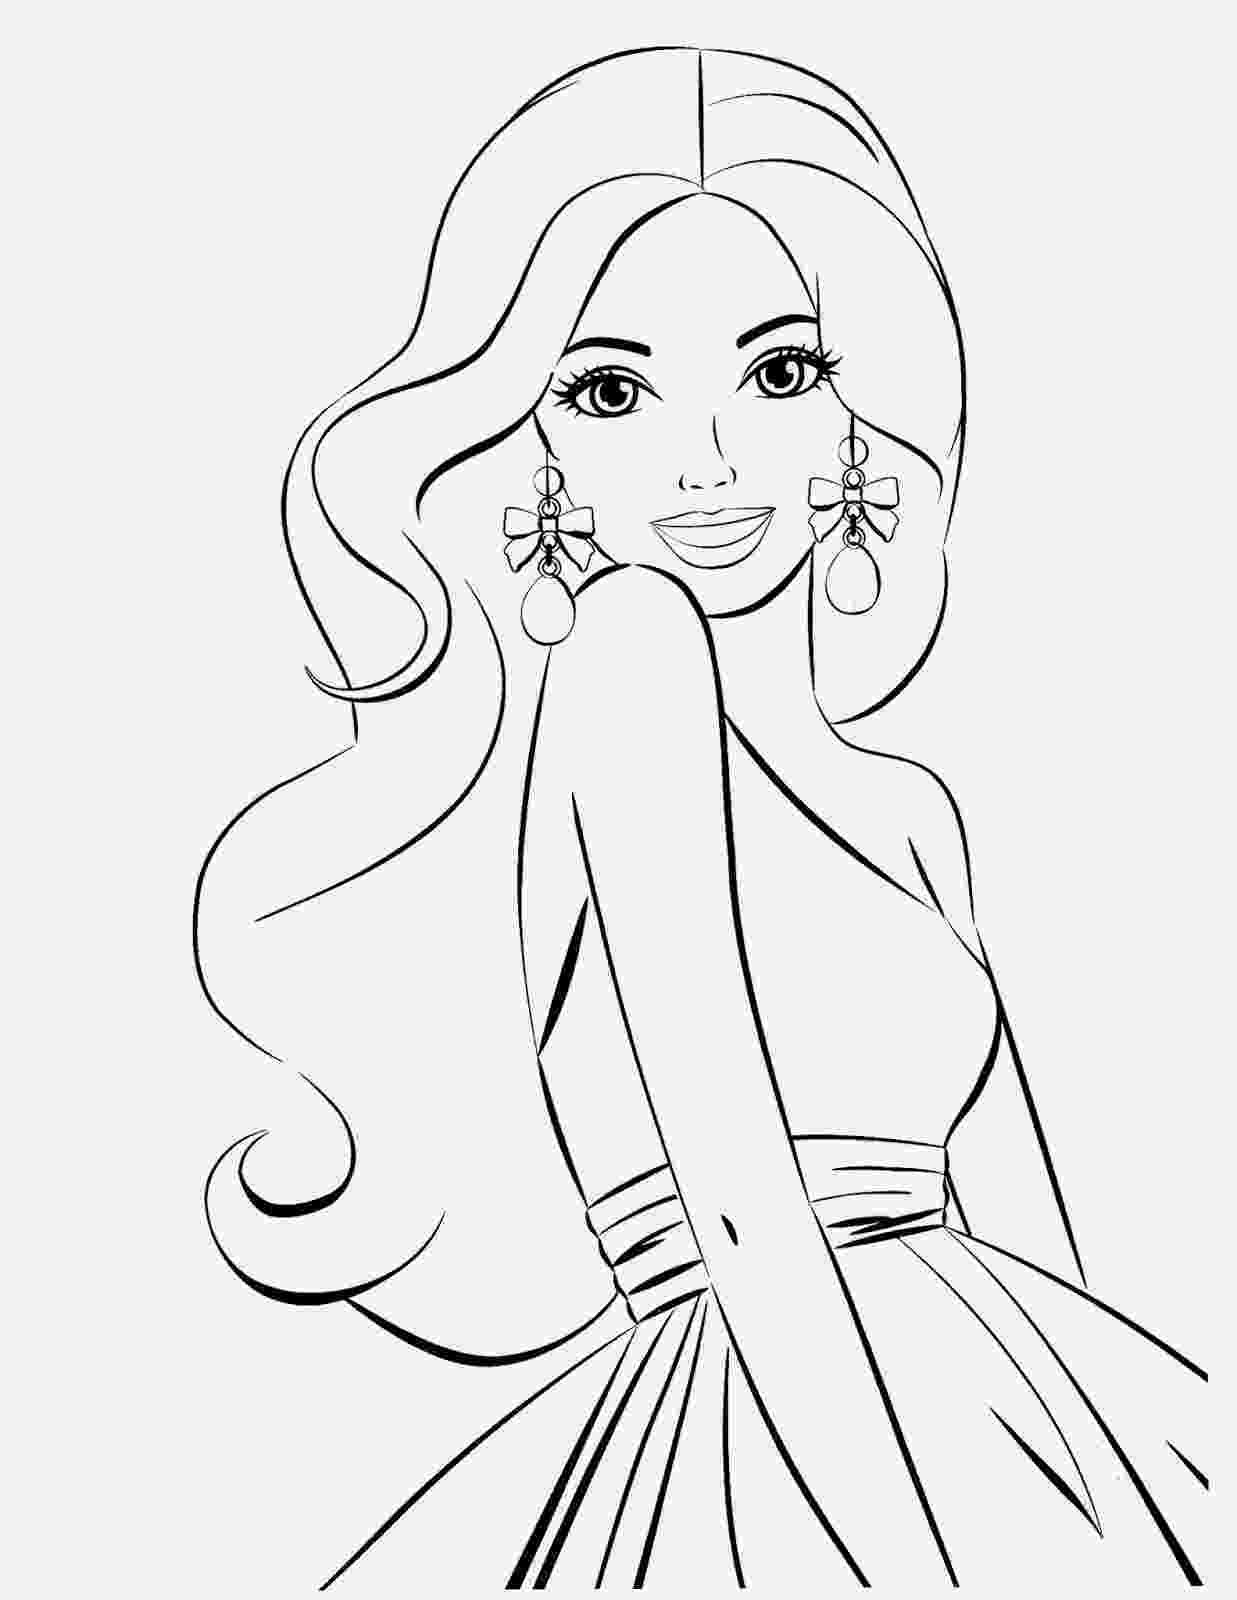 barbie color pages to print coloring pages barbie free printable coloring pages to color print pages barbie 